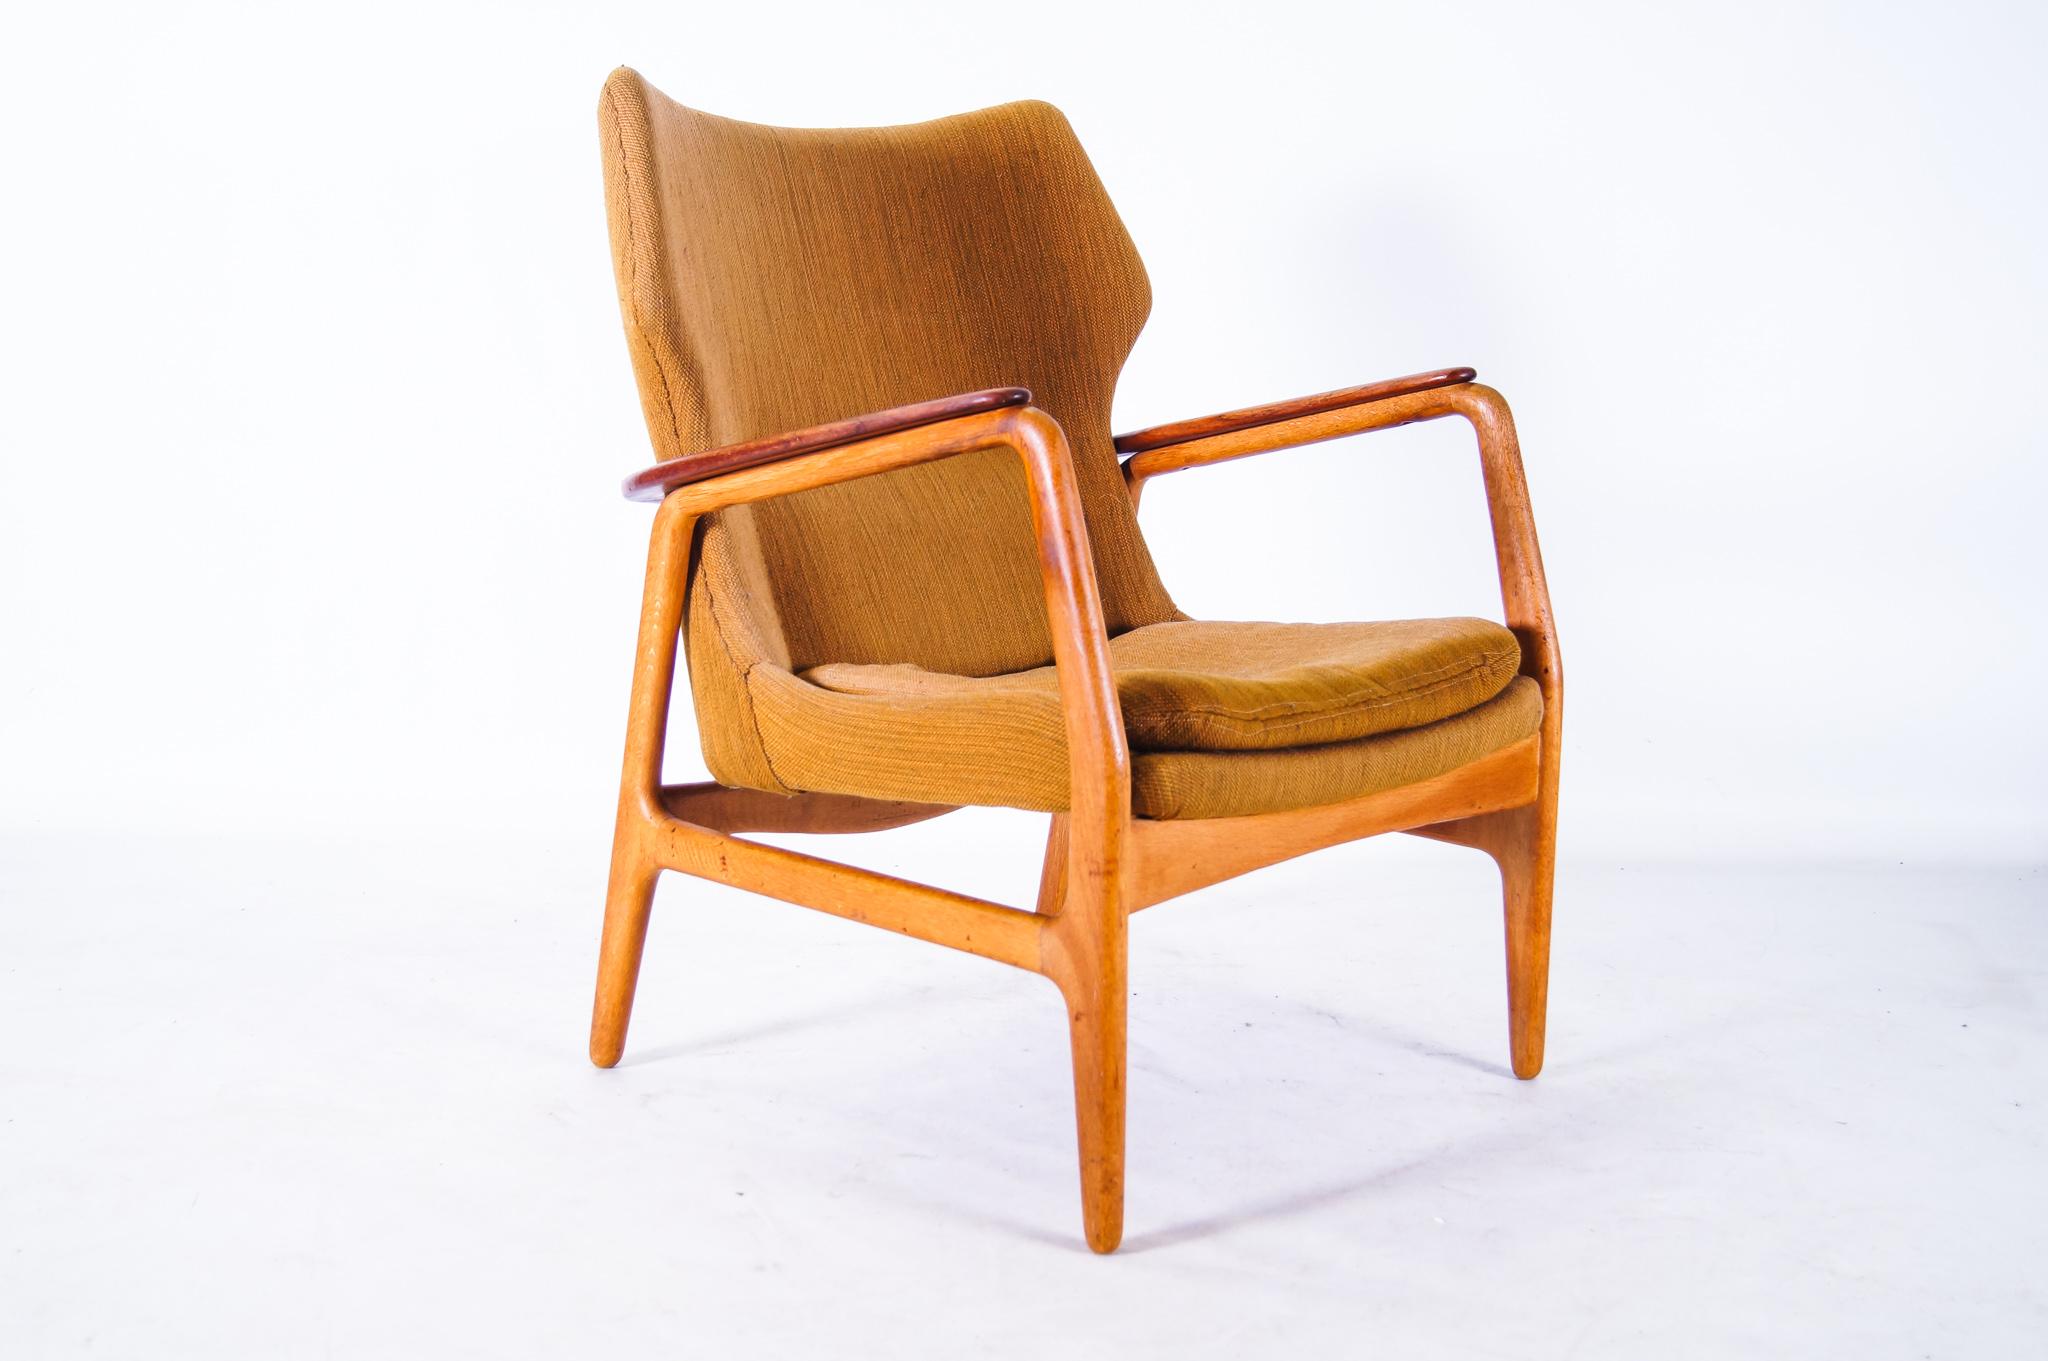 Bovenkamp fauteuil designed by the Danish designer Aksel Bender Madsen for the Dutch furniture company Bovenkamp in the 1960s. What is special about this design is that the armrests continue behind the backrest. Striking in this organic design is